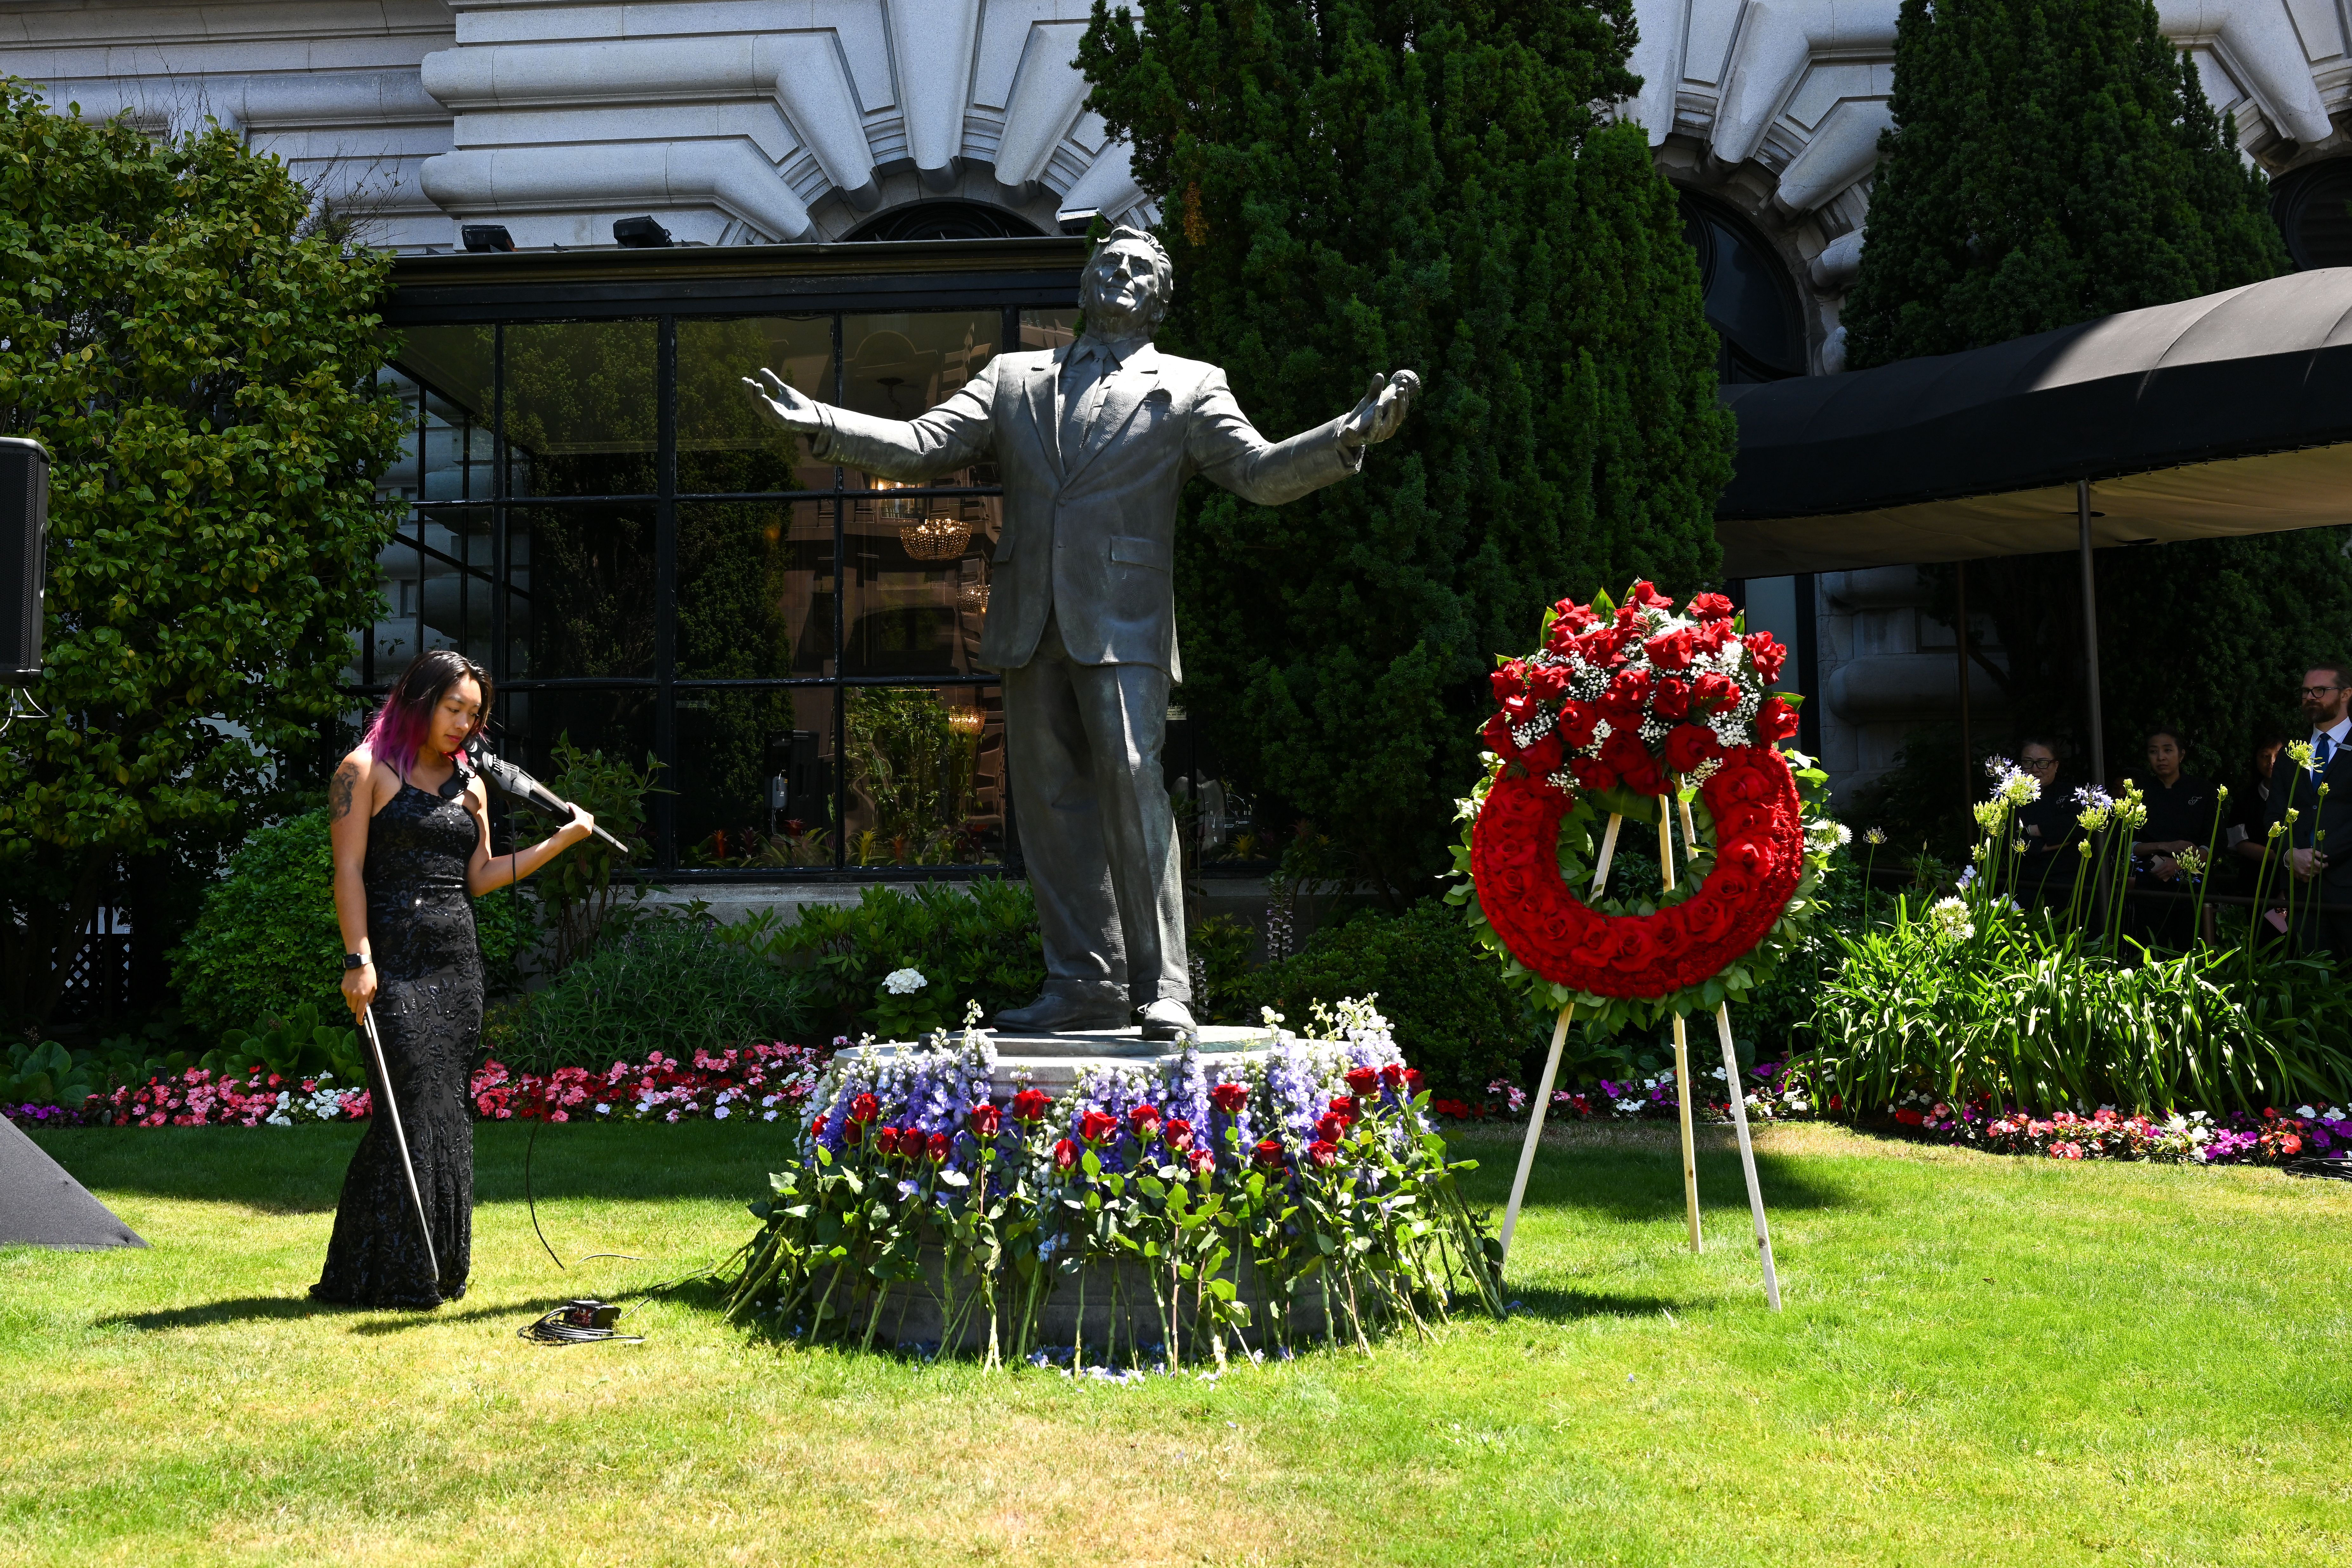 Photo of a violinist standing next to a statue of Tony Bennett on a grassy lawn